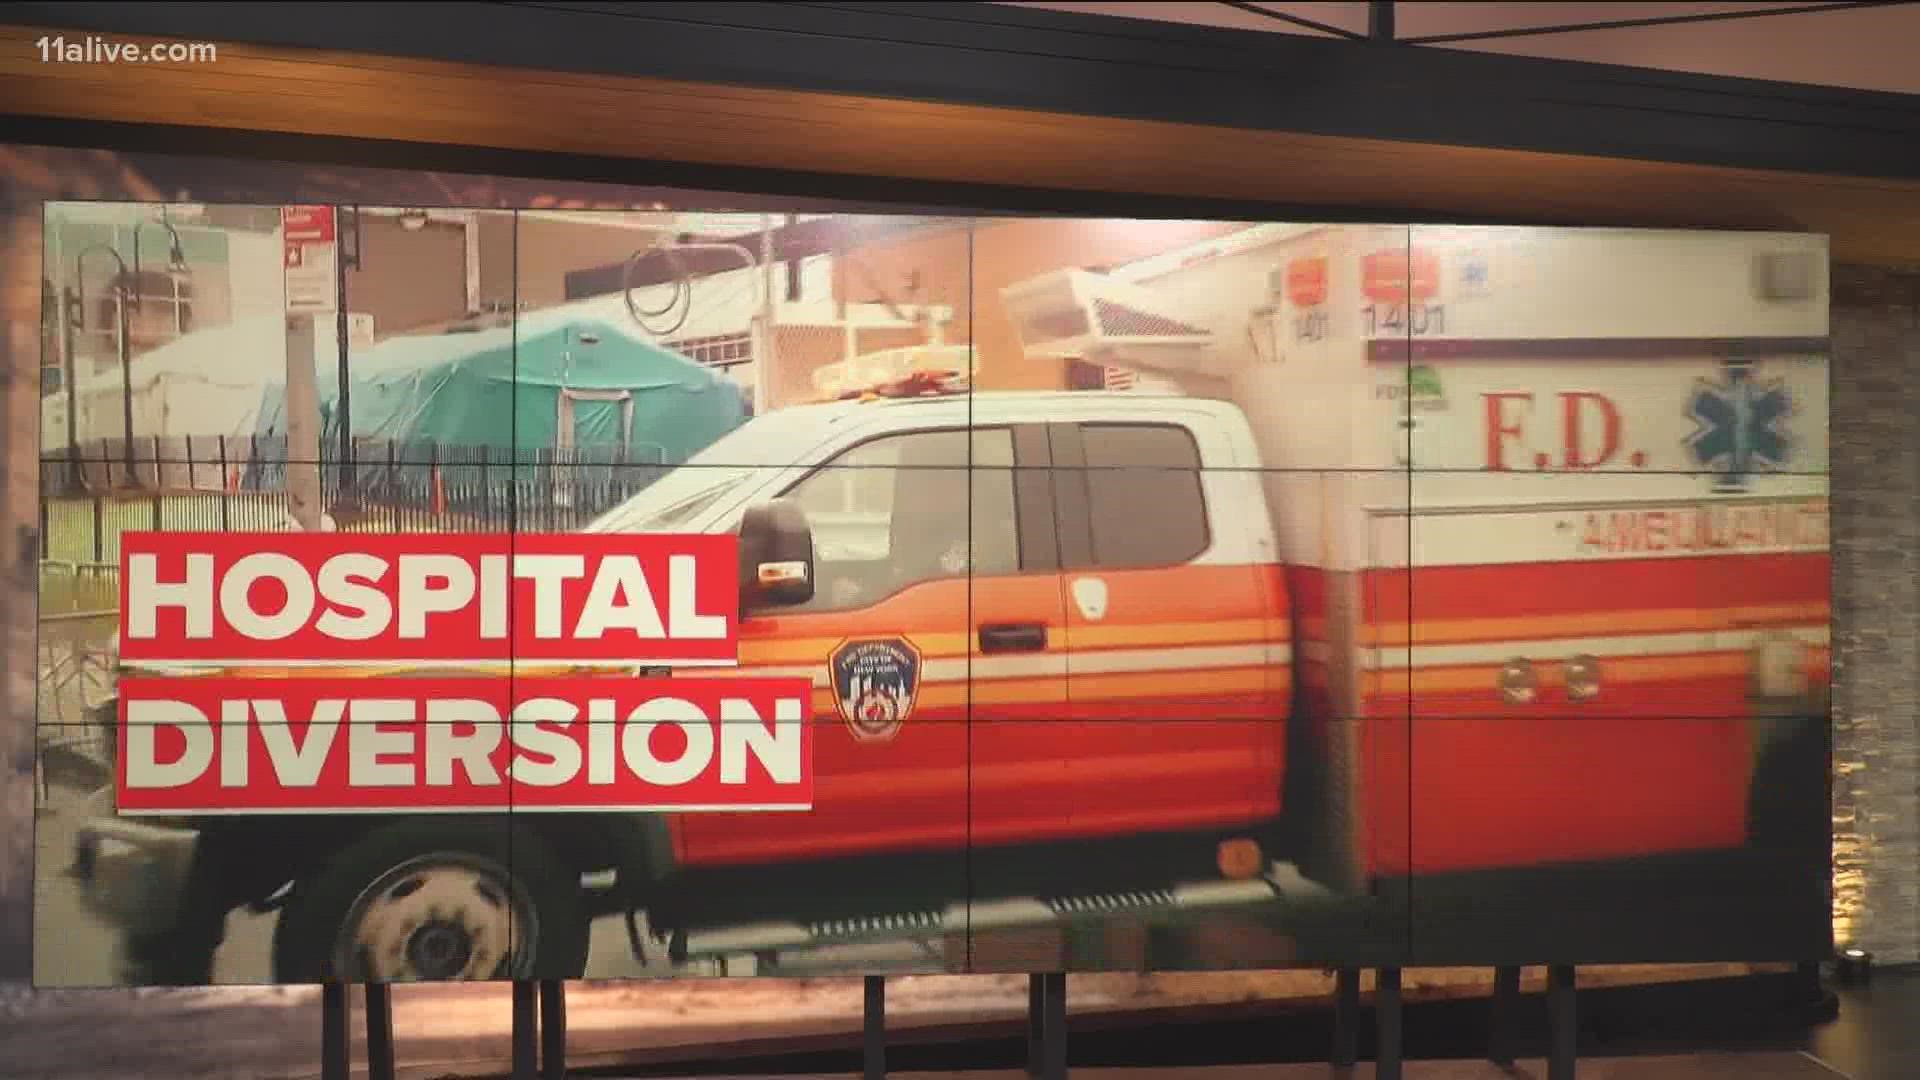 The Department of Public Health put out a public notice about hospitals on diversion on Thursday.